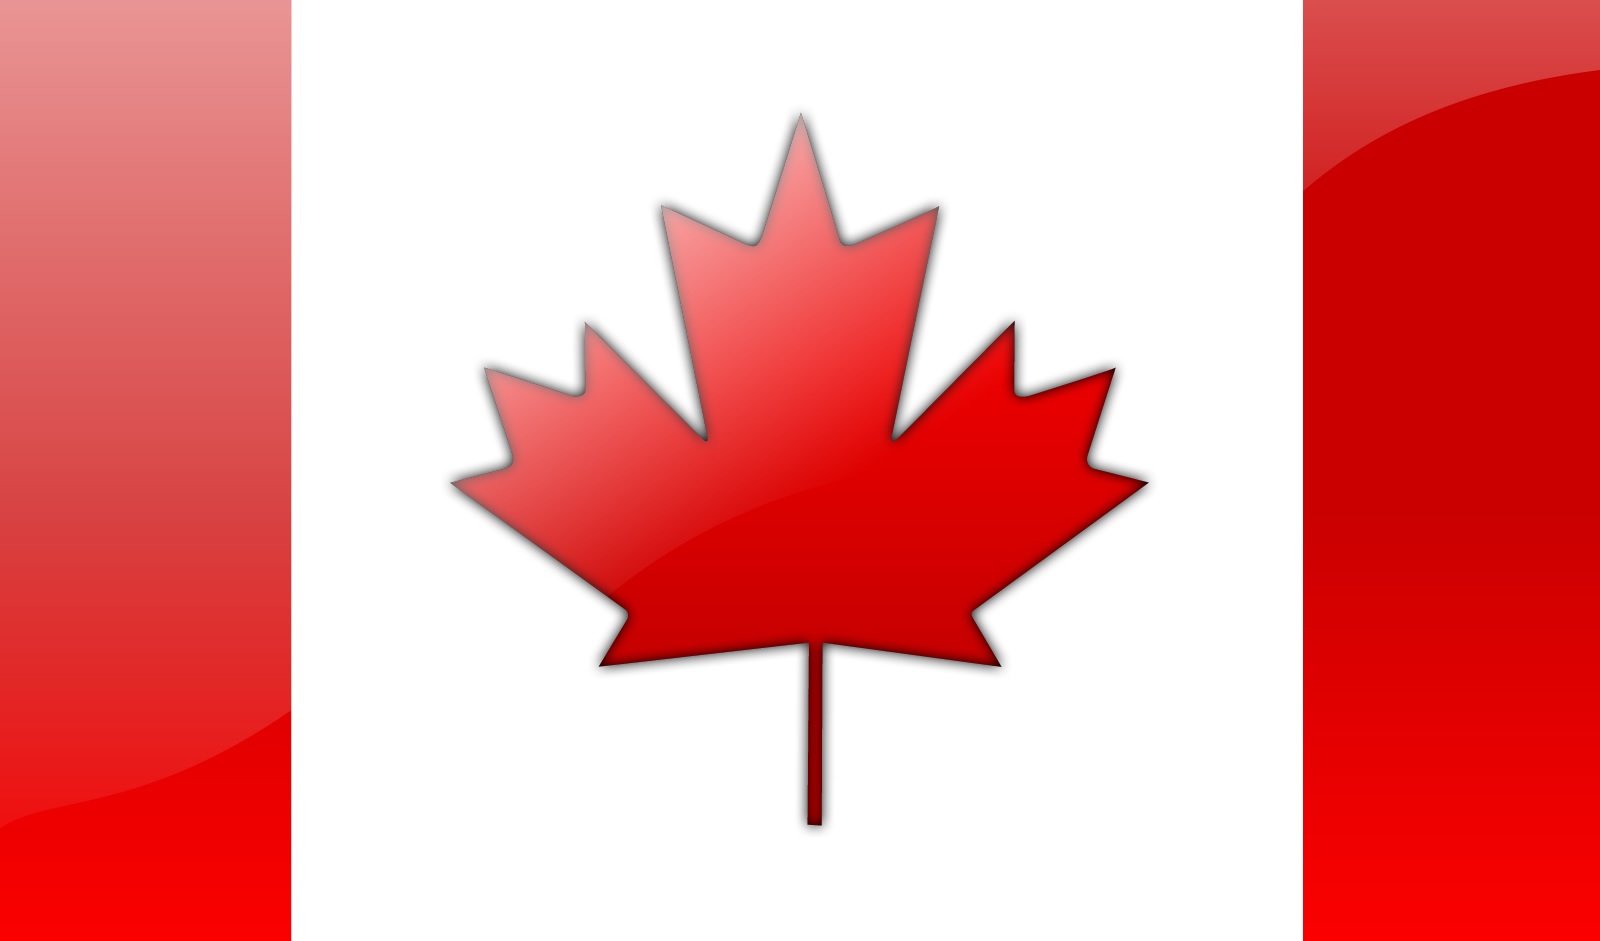 Canadian flag by jeremebp on Clipart library